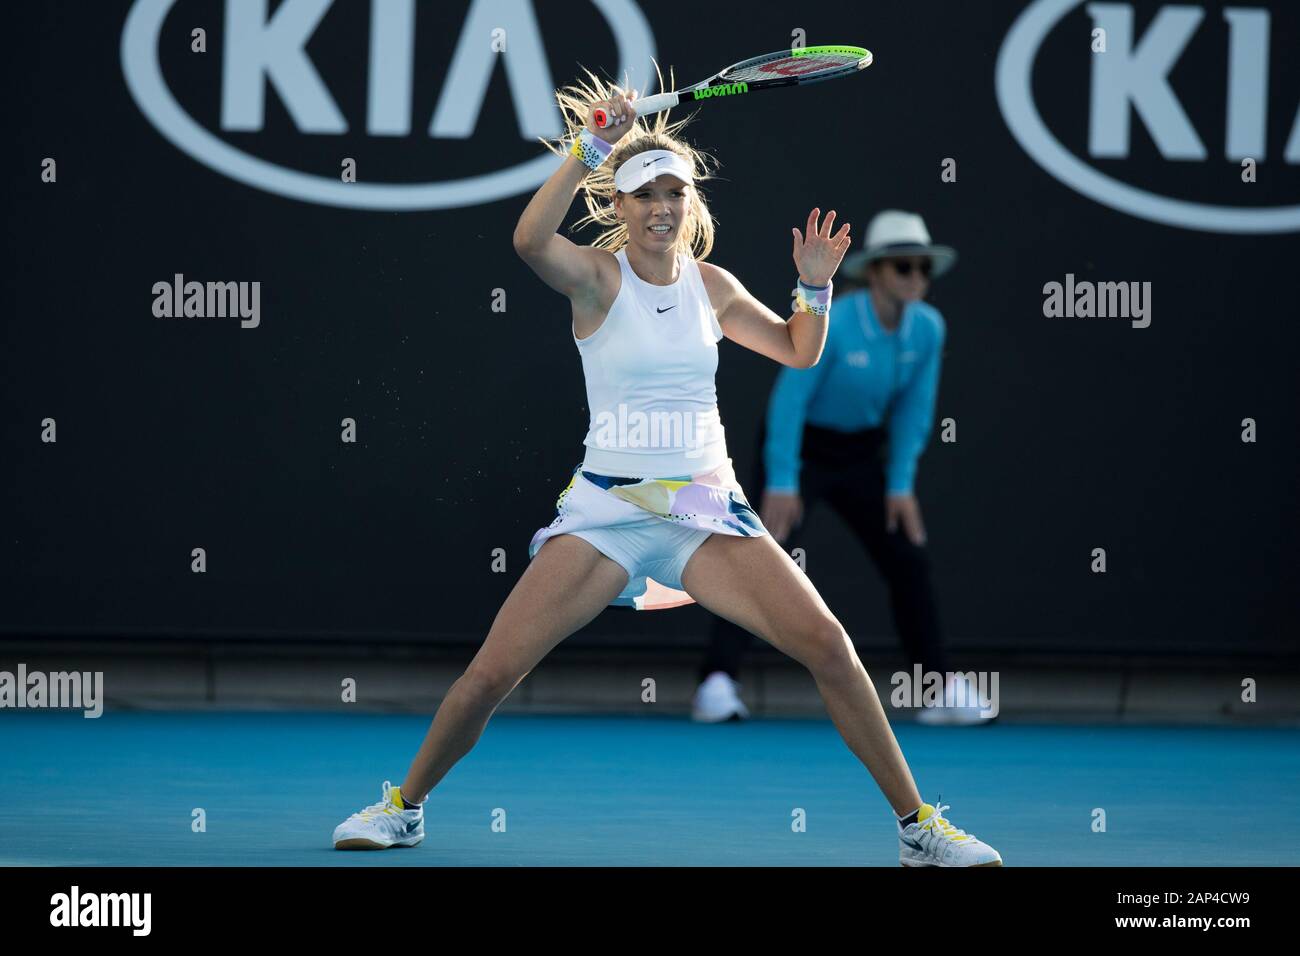 bestemt Bestemt Rotere Melbourne, Australia. 21st Jan, 2020. Katie Boulter of Great Britain played  Elina Svitolina of Ukraine during the first round match at the ATP  Australian Open 2020 at Melbourne Park, Melbourne, Australia on